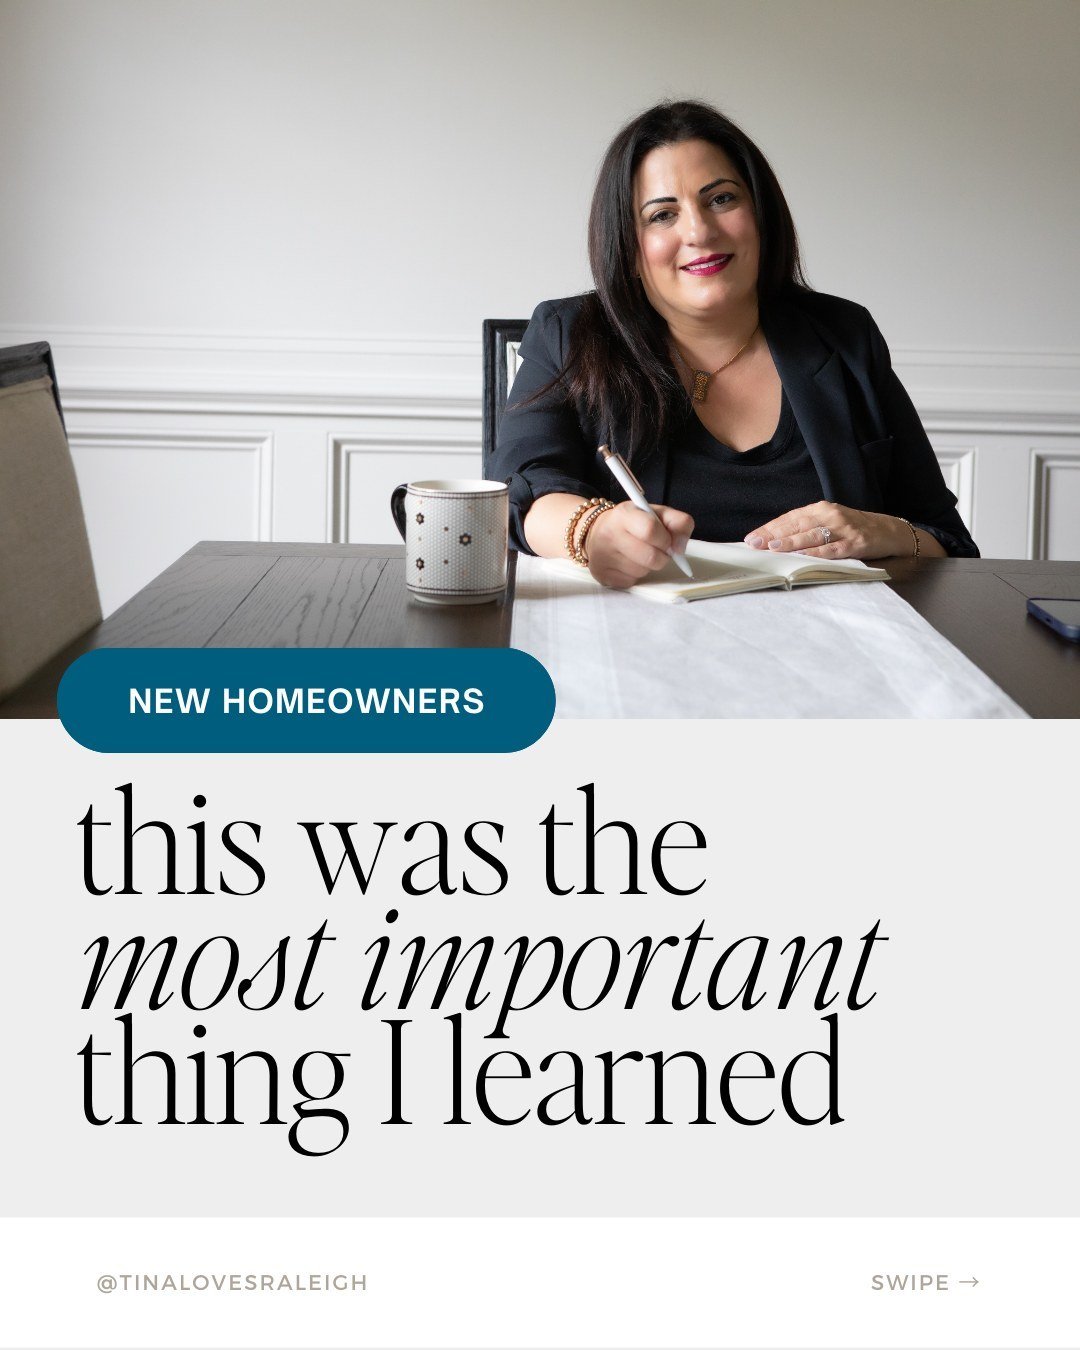 One thing I won't stop telling new homeowners?⁠
Budget for repairs and replacements.⁠
⁠
Taking this advice early in homeownership can be a lifesaver down the road.⁠
⁠
SWIPE ⬅️ ⁠
Here are some notes I&rsquo;ve shared with my buyers &mdash; I&rsquo;ve 